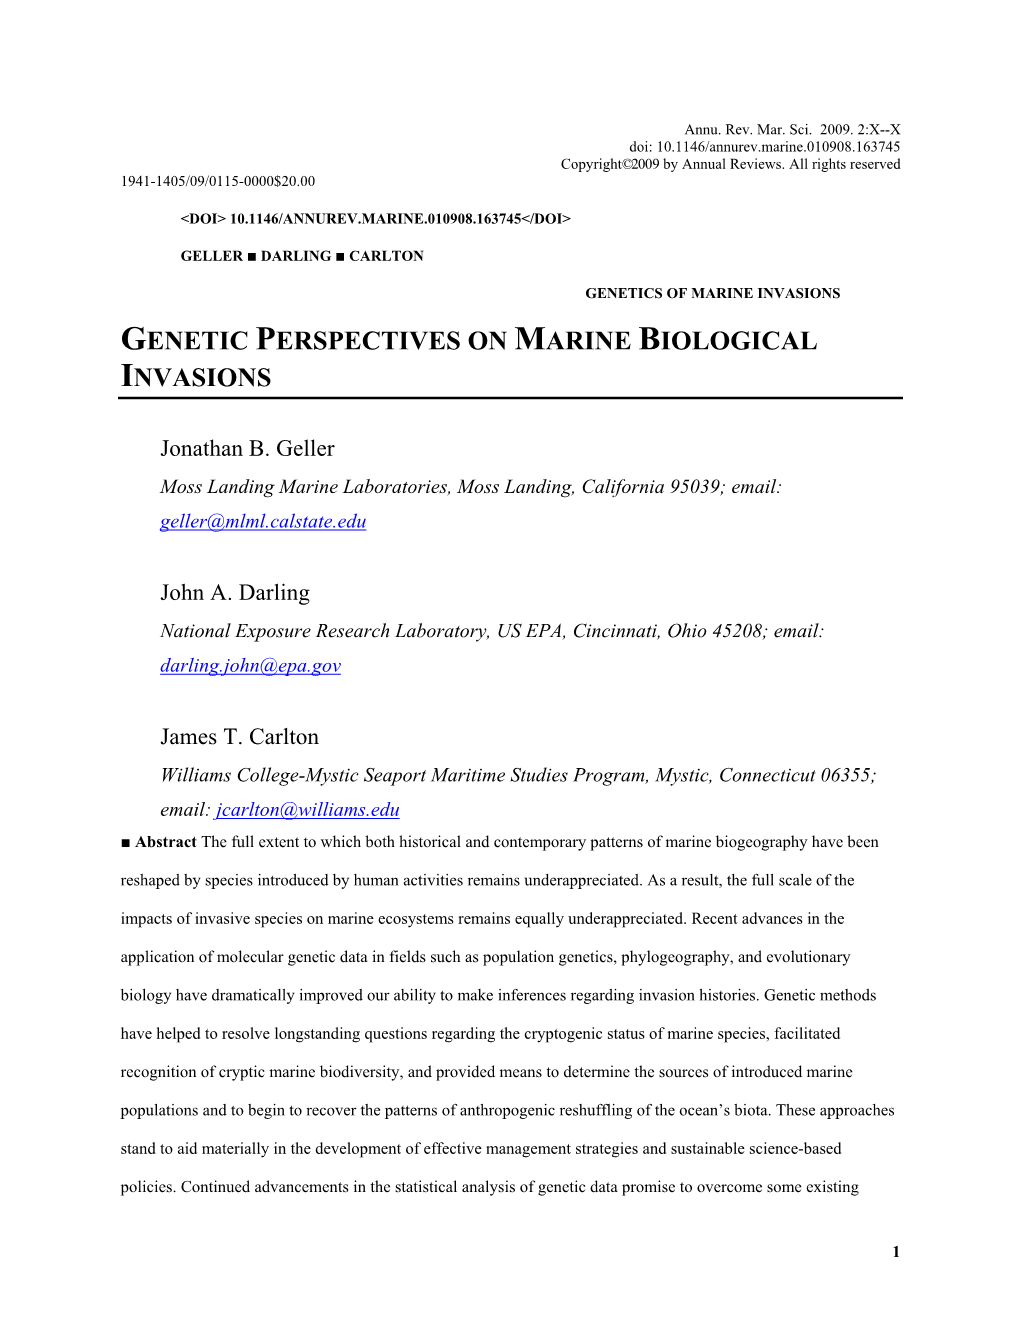 Genetic Perspectives on Marine Biological Invasions